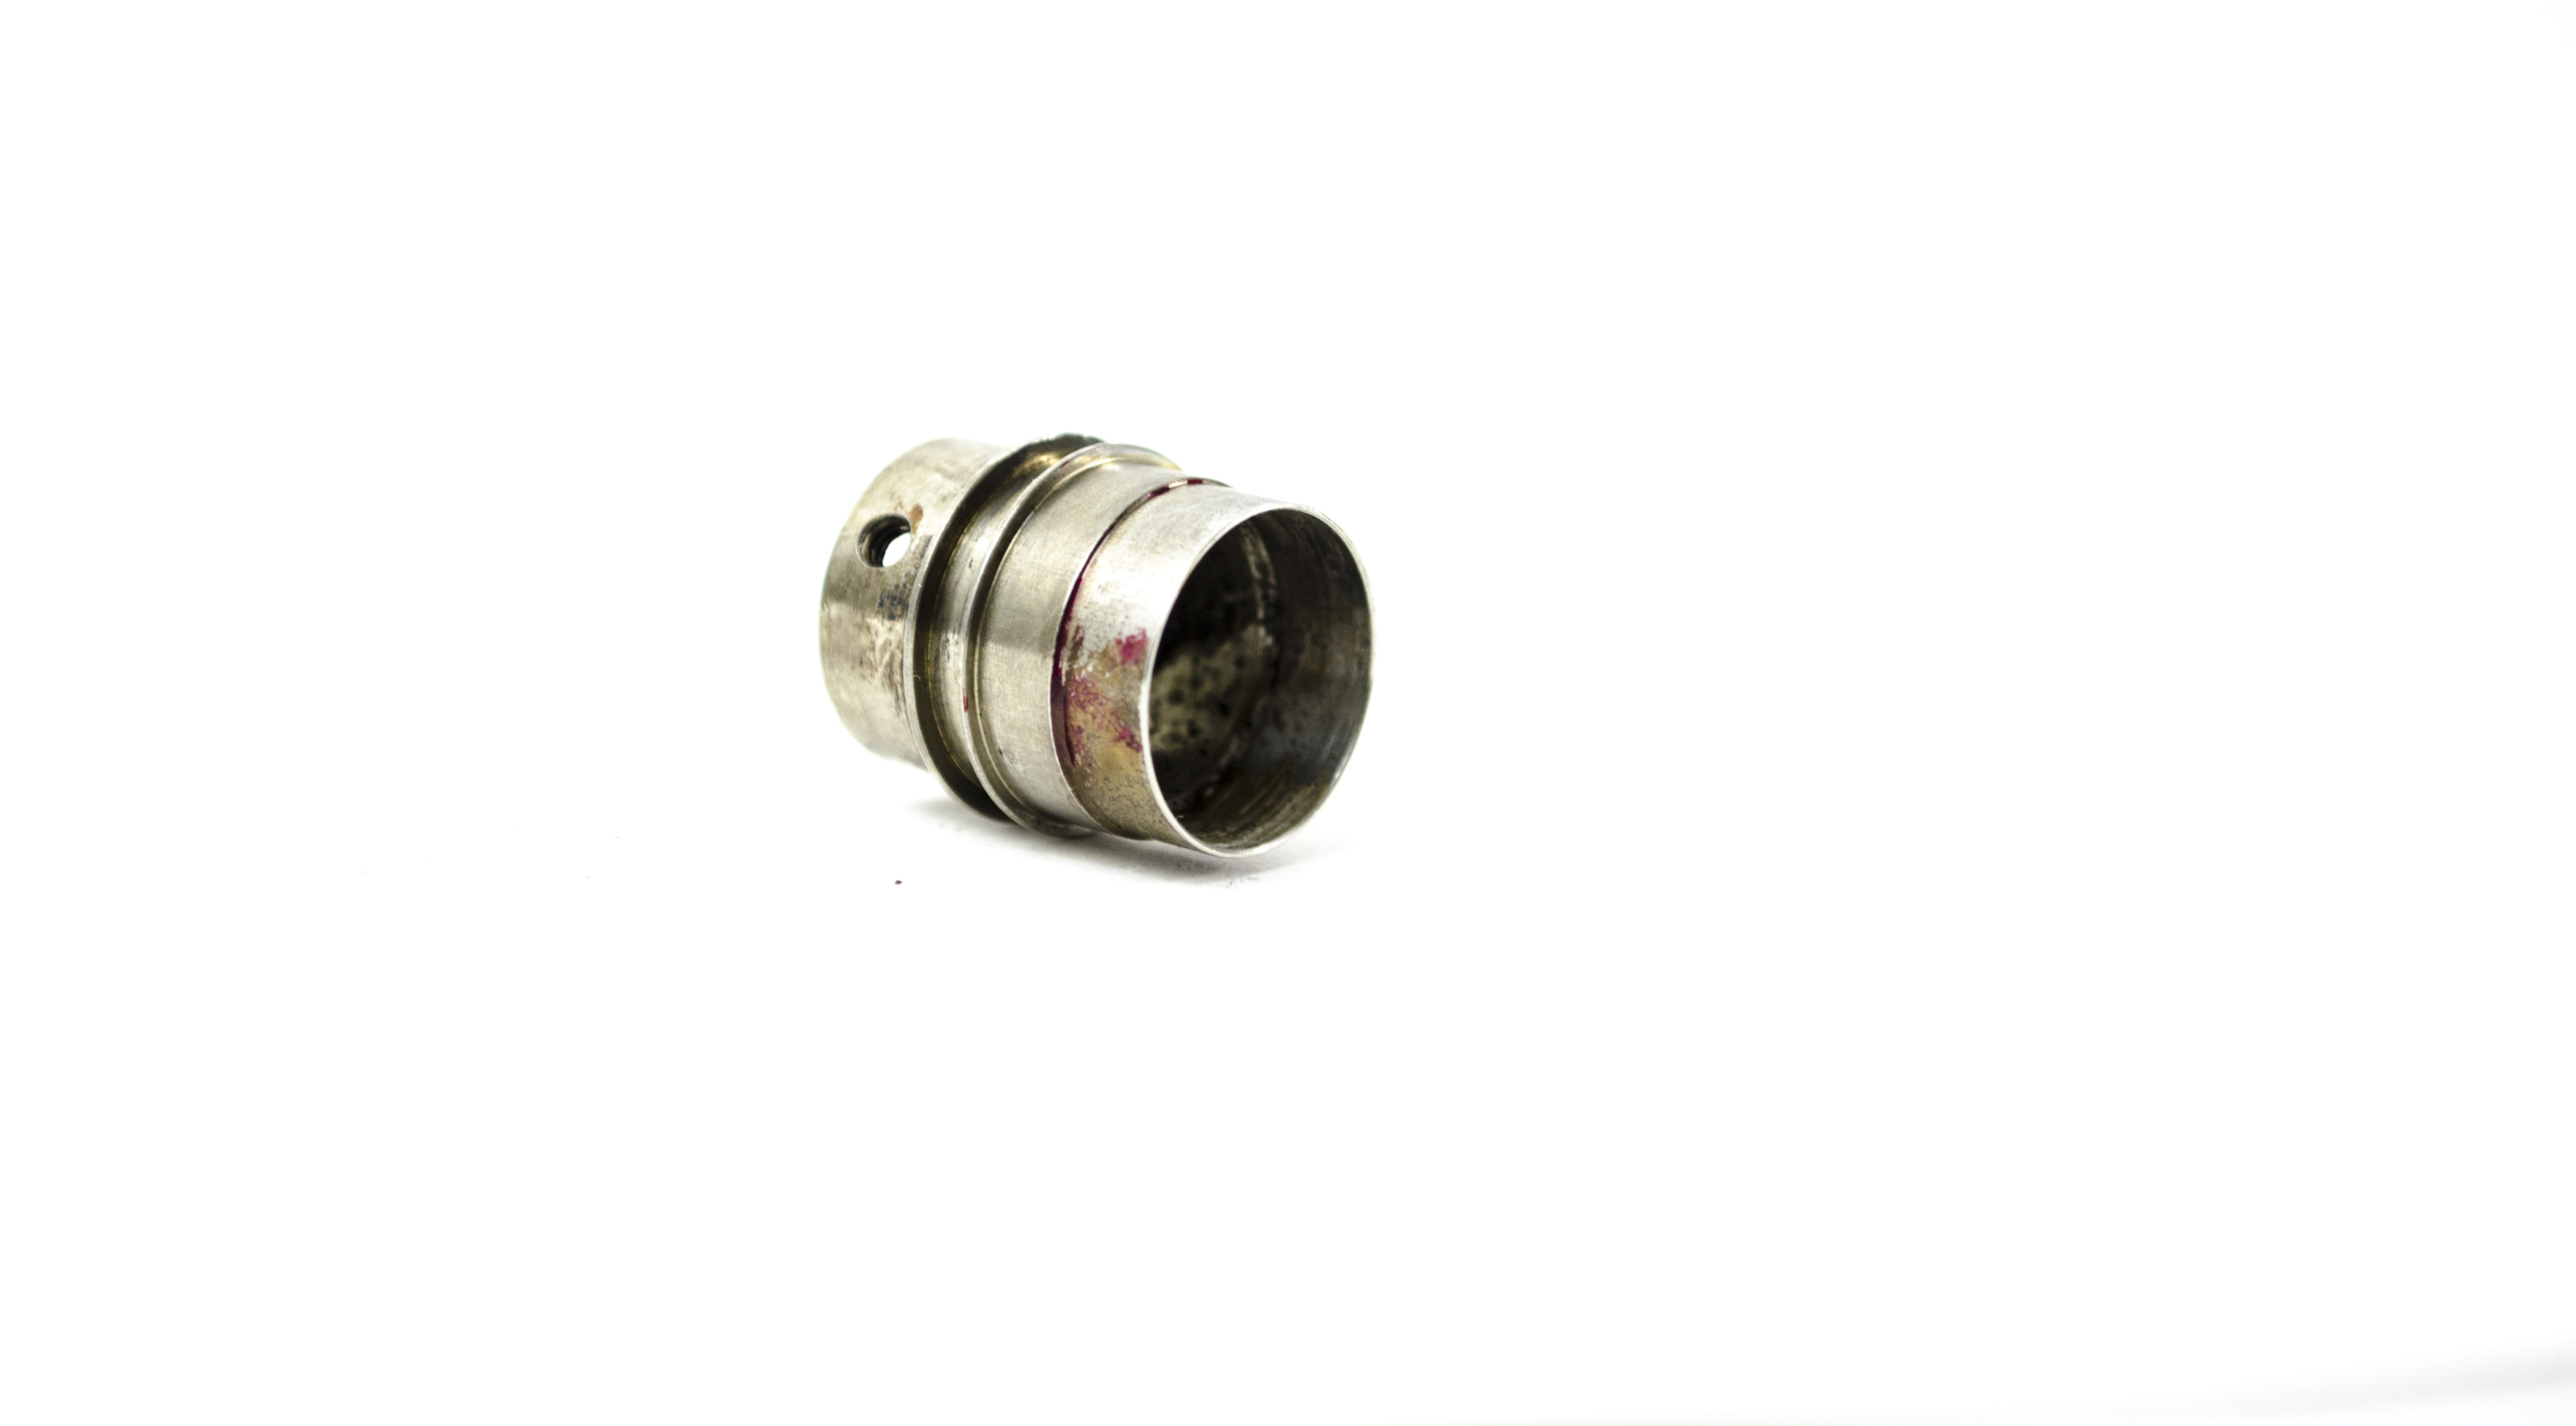 OEM Insertion Tube Proximal End Fitting - PCF-140L, PCF-140I